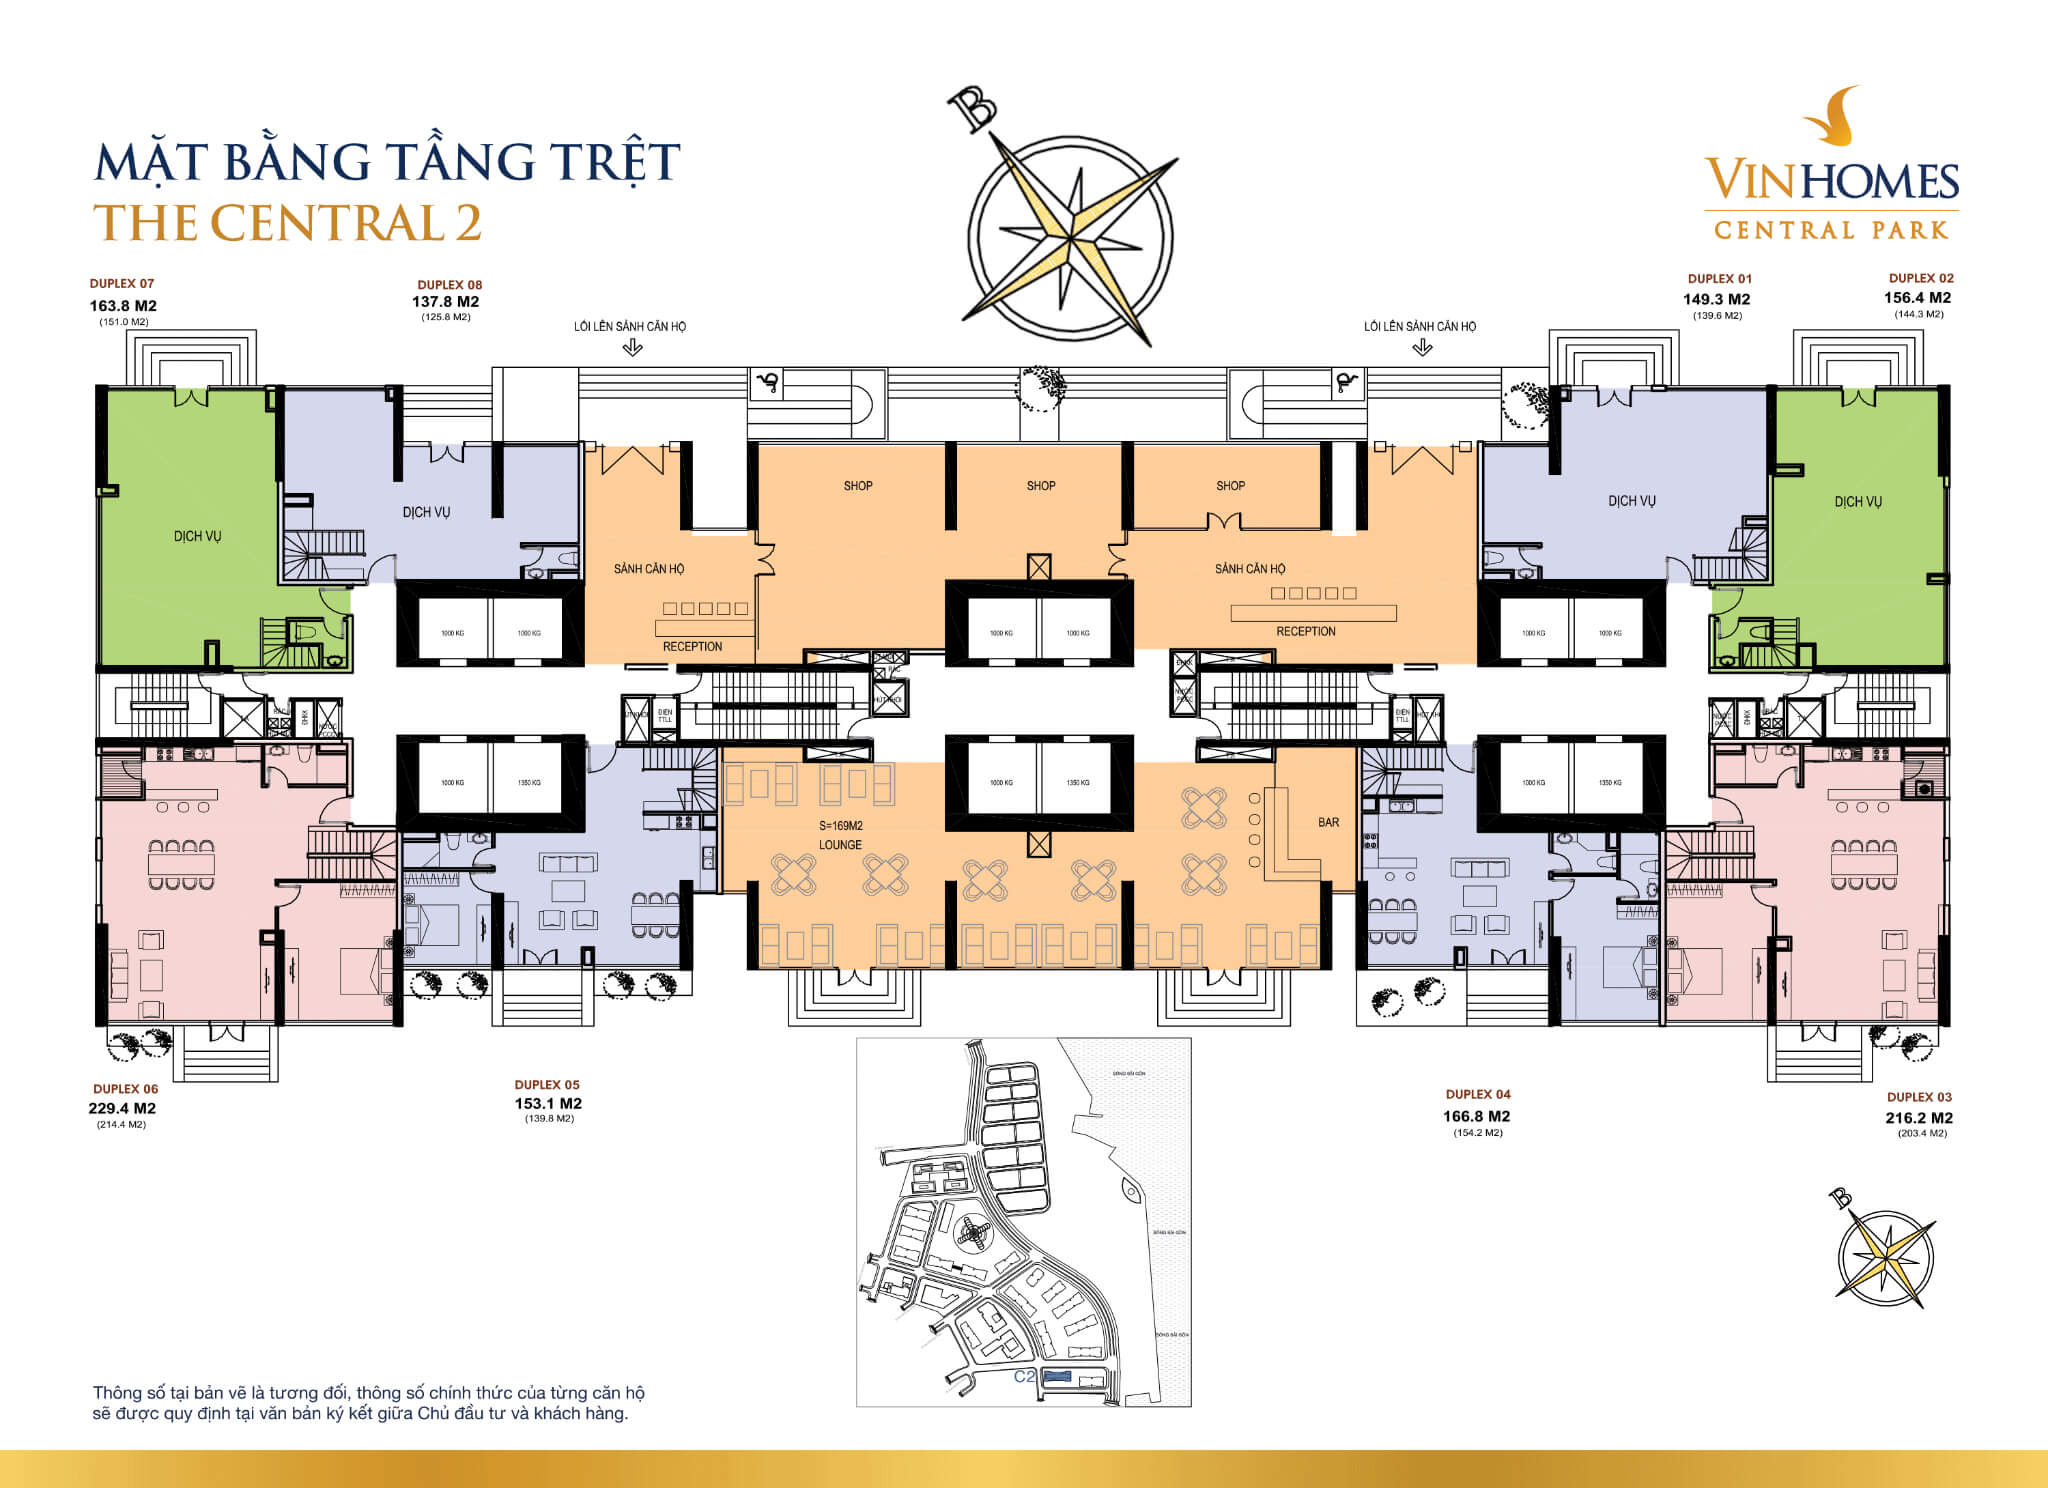 Mặt bằng layout tòa The Central 2 tầng trệt tại Vinhomes Central Park